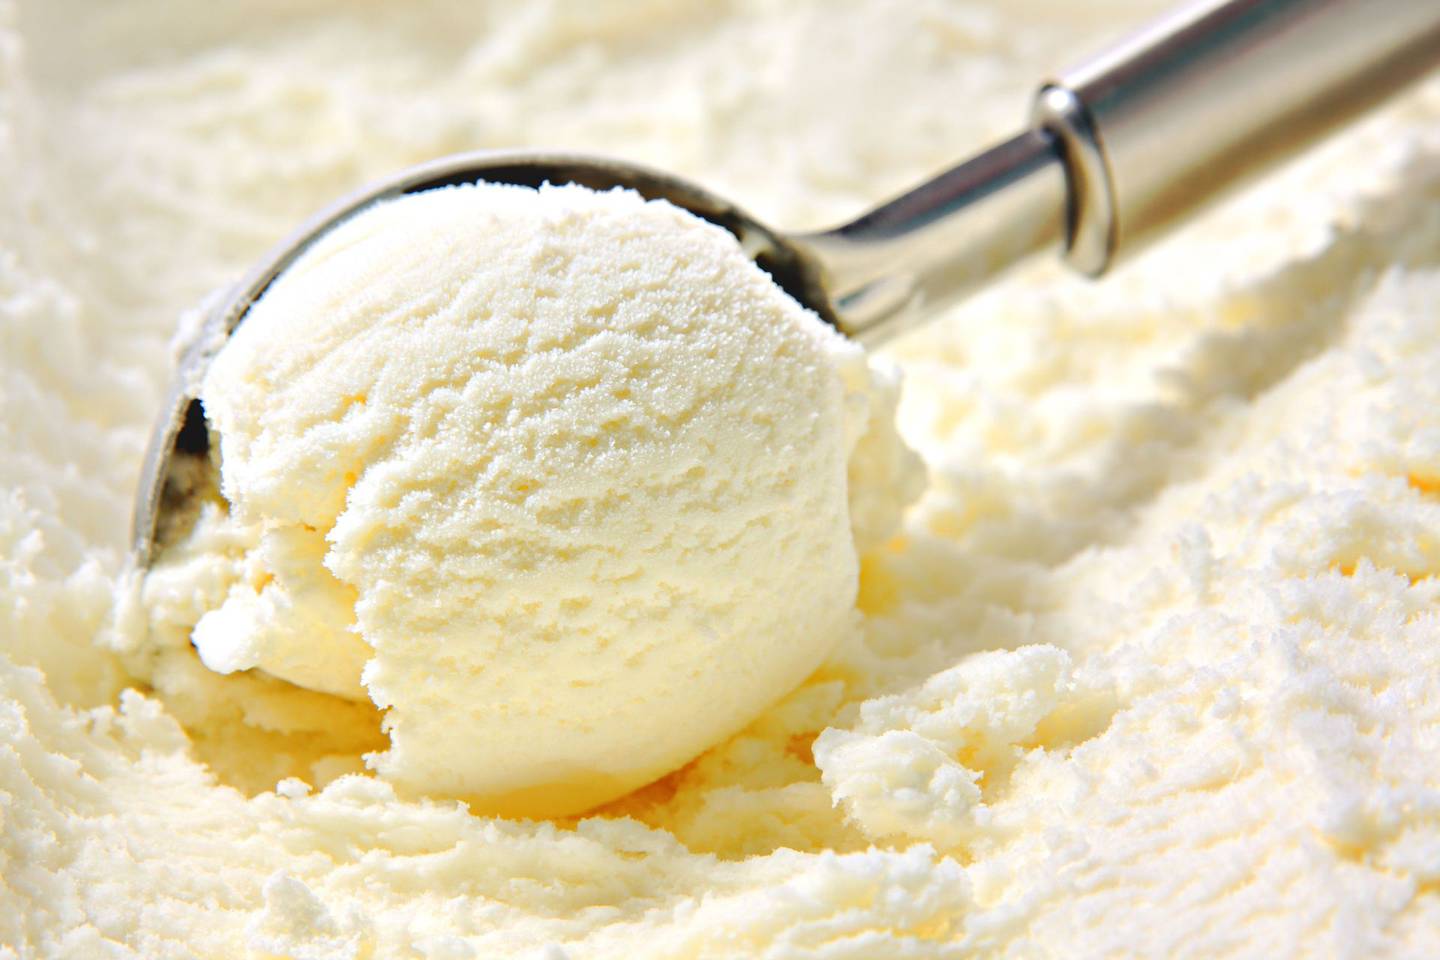 The ice cream is made in China, using milk powder imported from New Zealand. Photo / 123rf